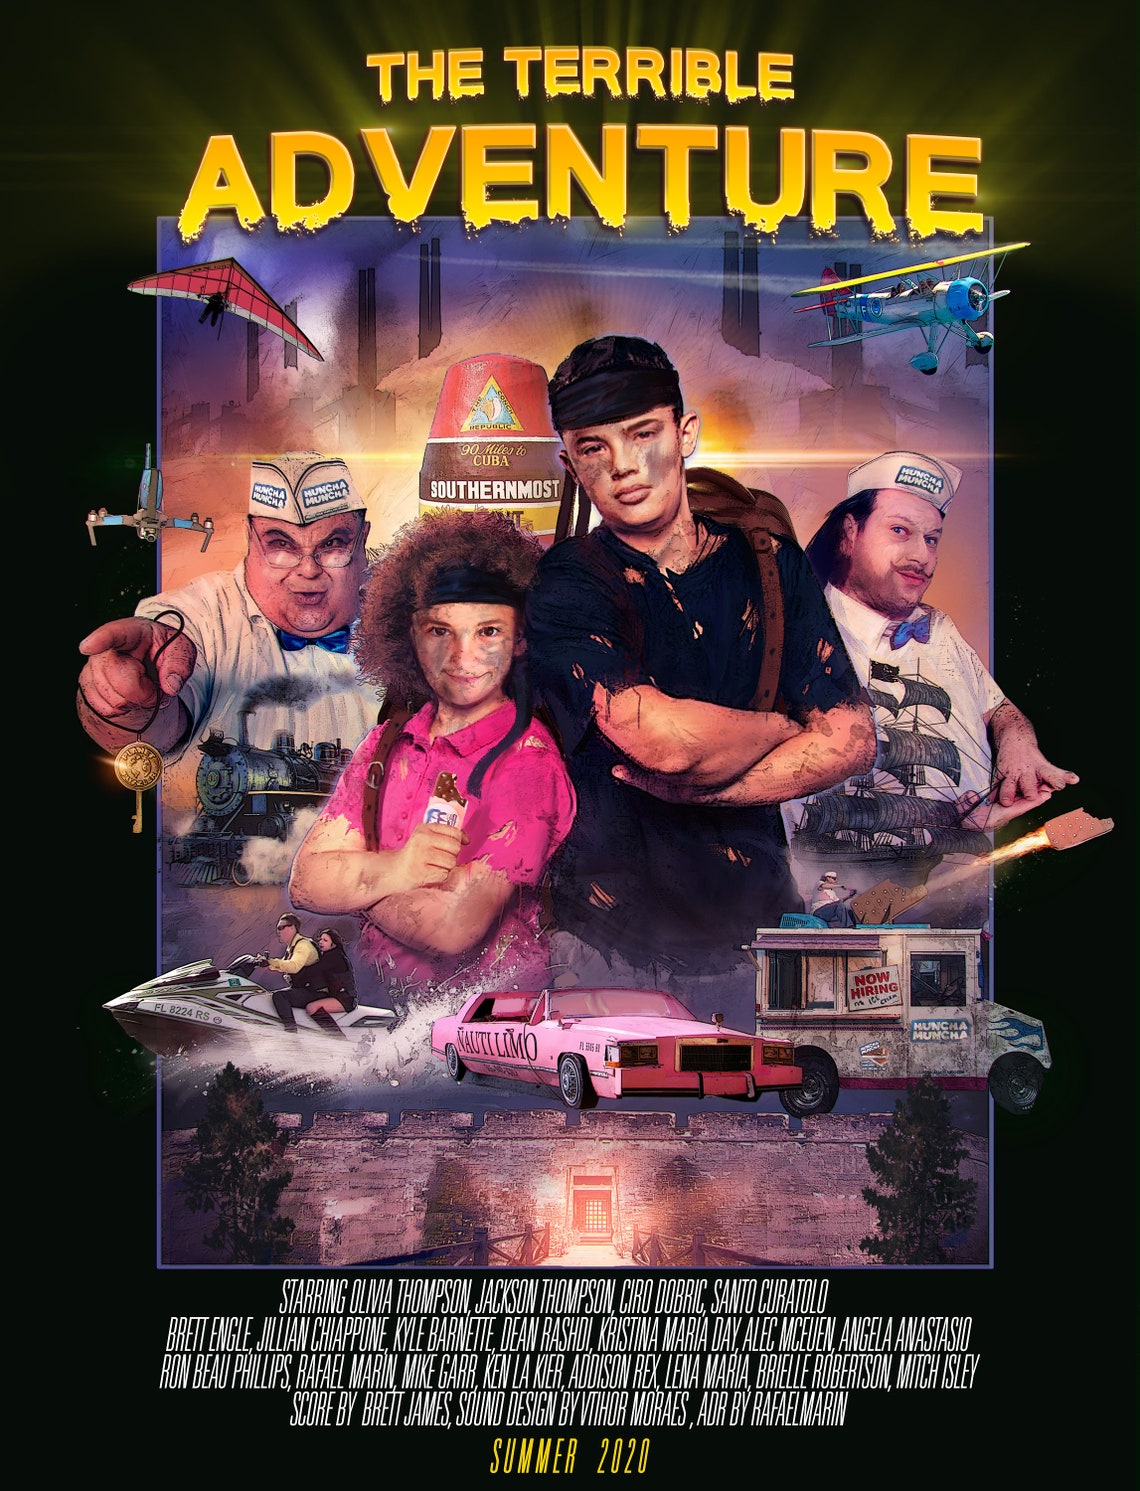 The Terrible Adventure 2020 Ver1 Movie Gloss Poster 17x 24 Etsy